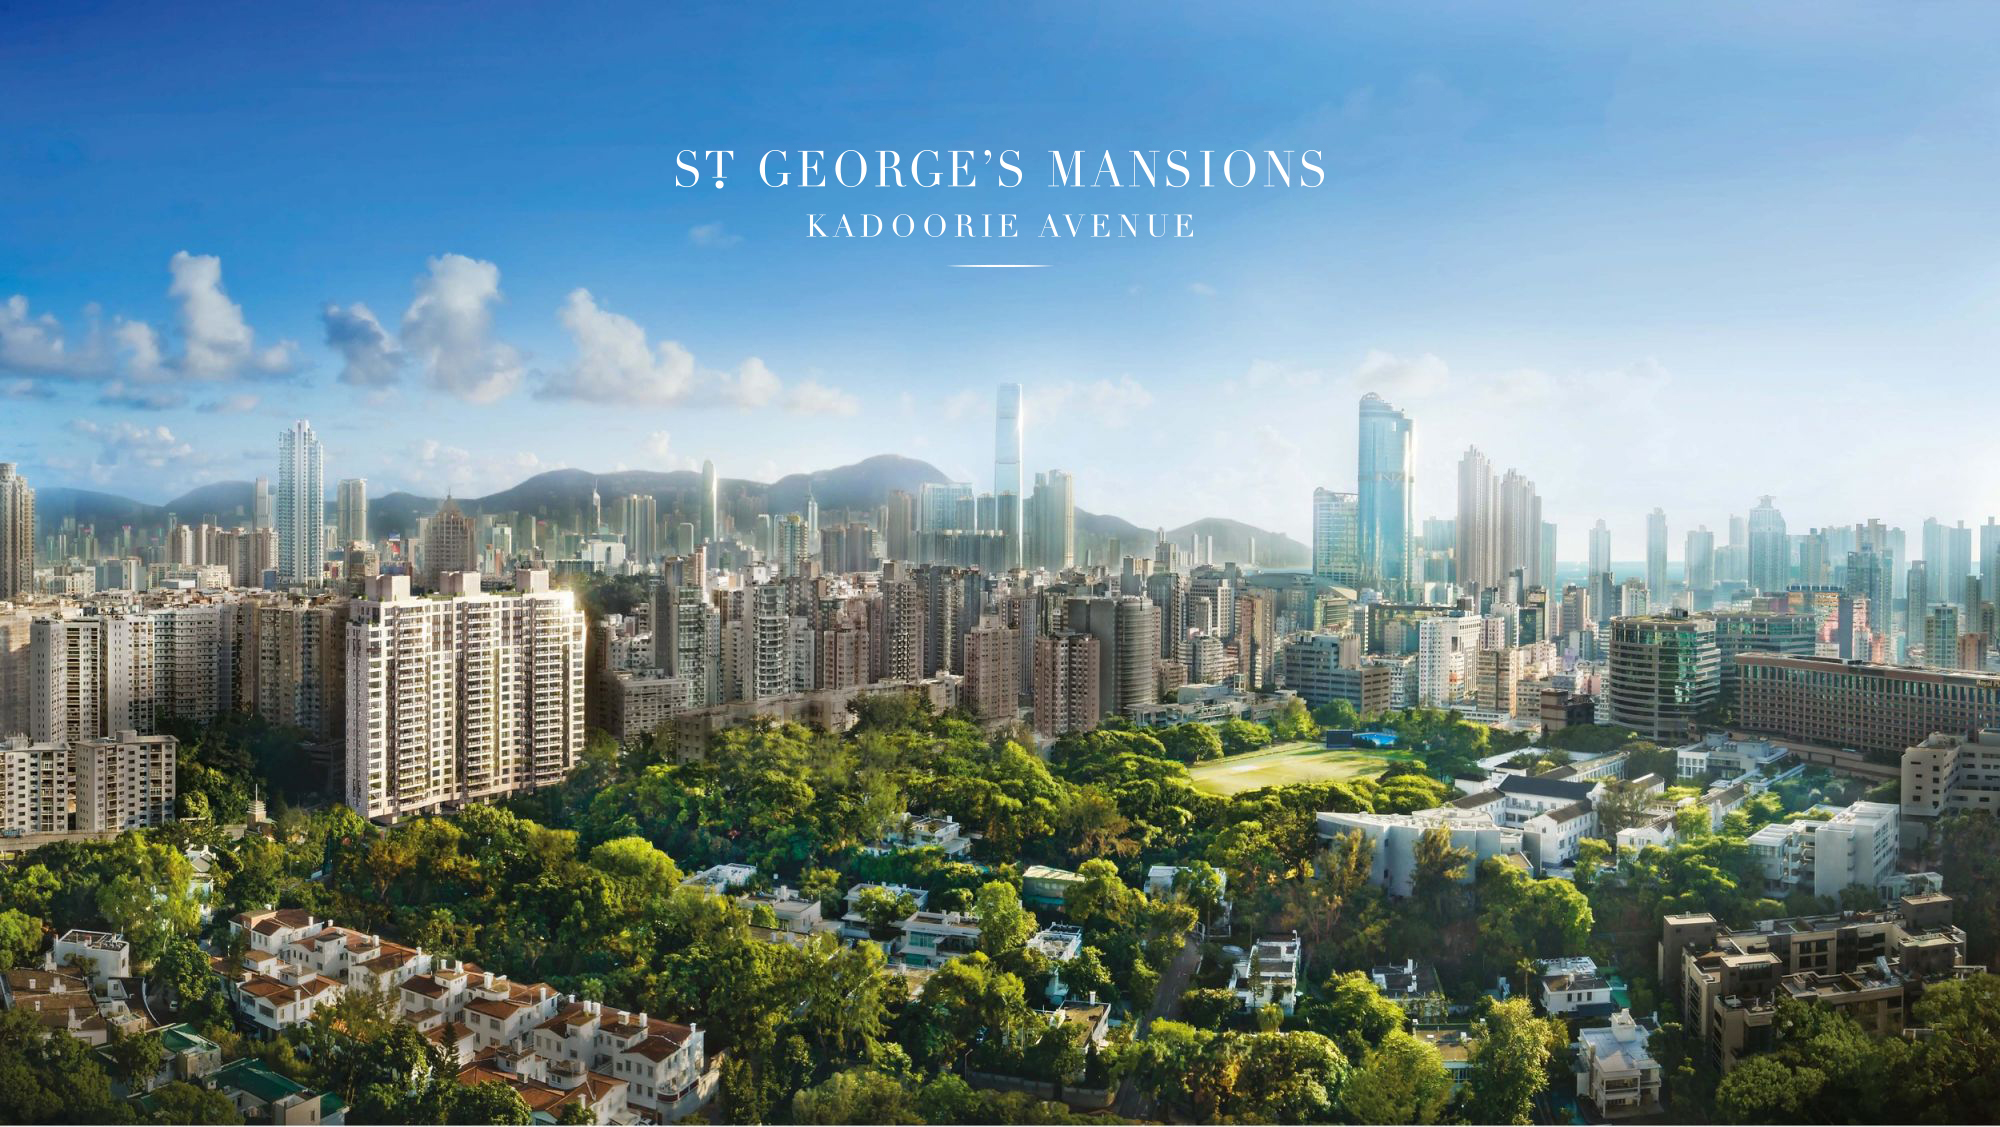 St. George’s Mansions